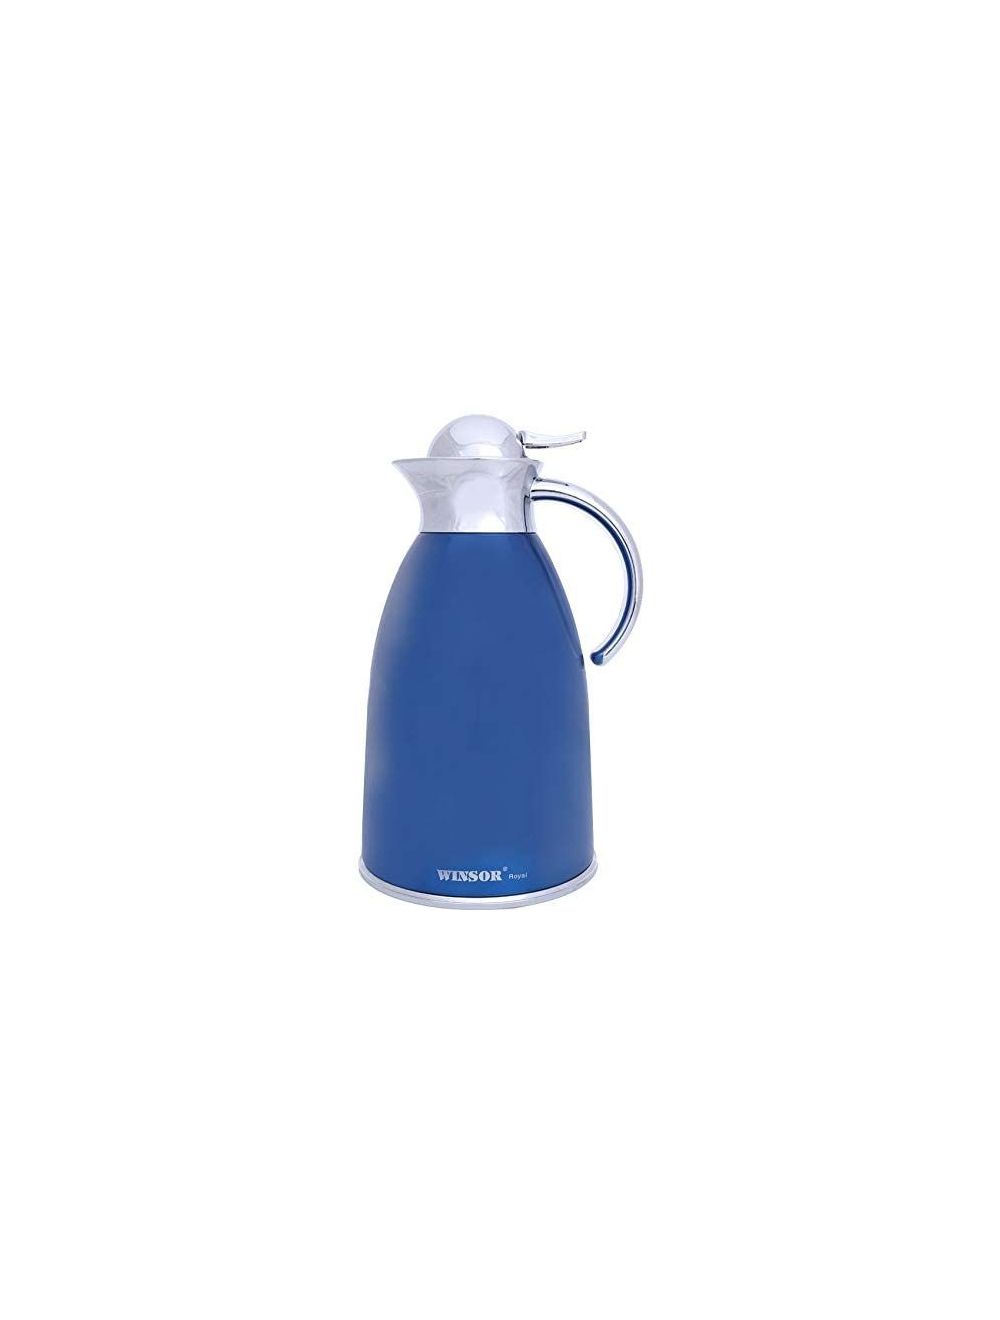 Winsor Stainless Steel Vacuum Flask 1.0 L - D.Blue-WR51232B